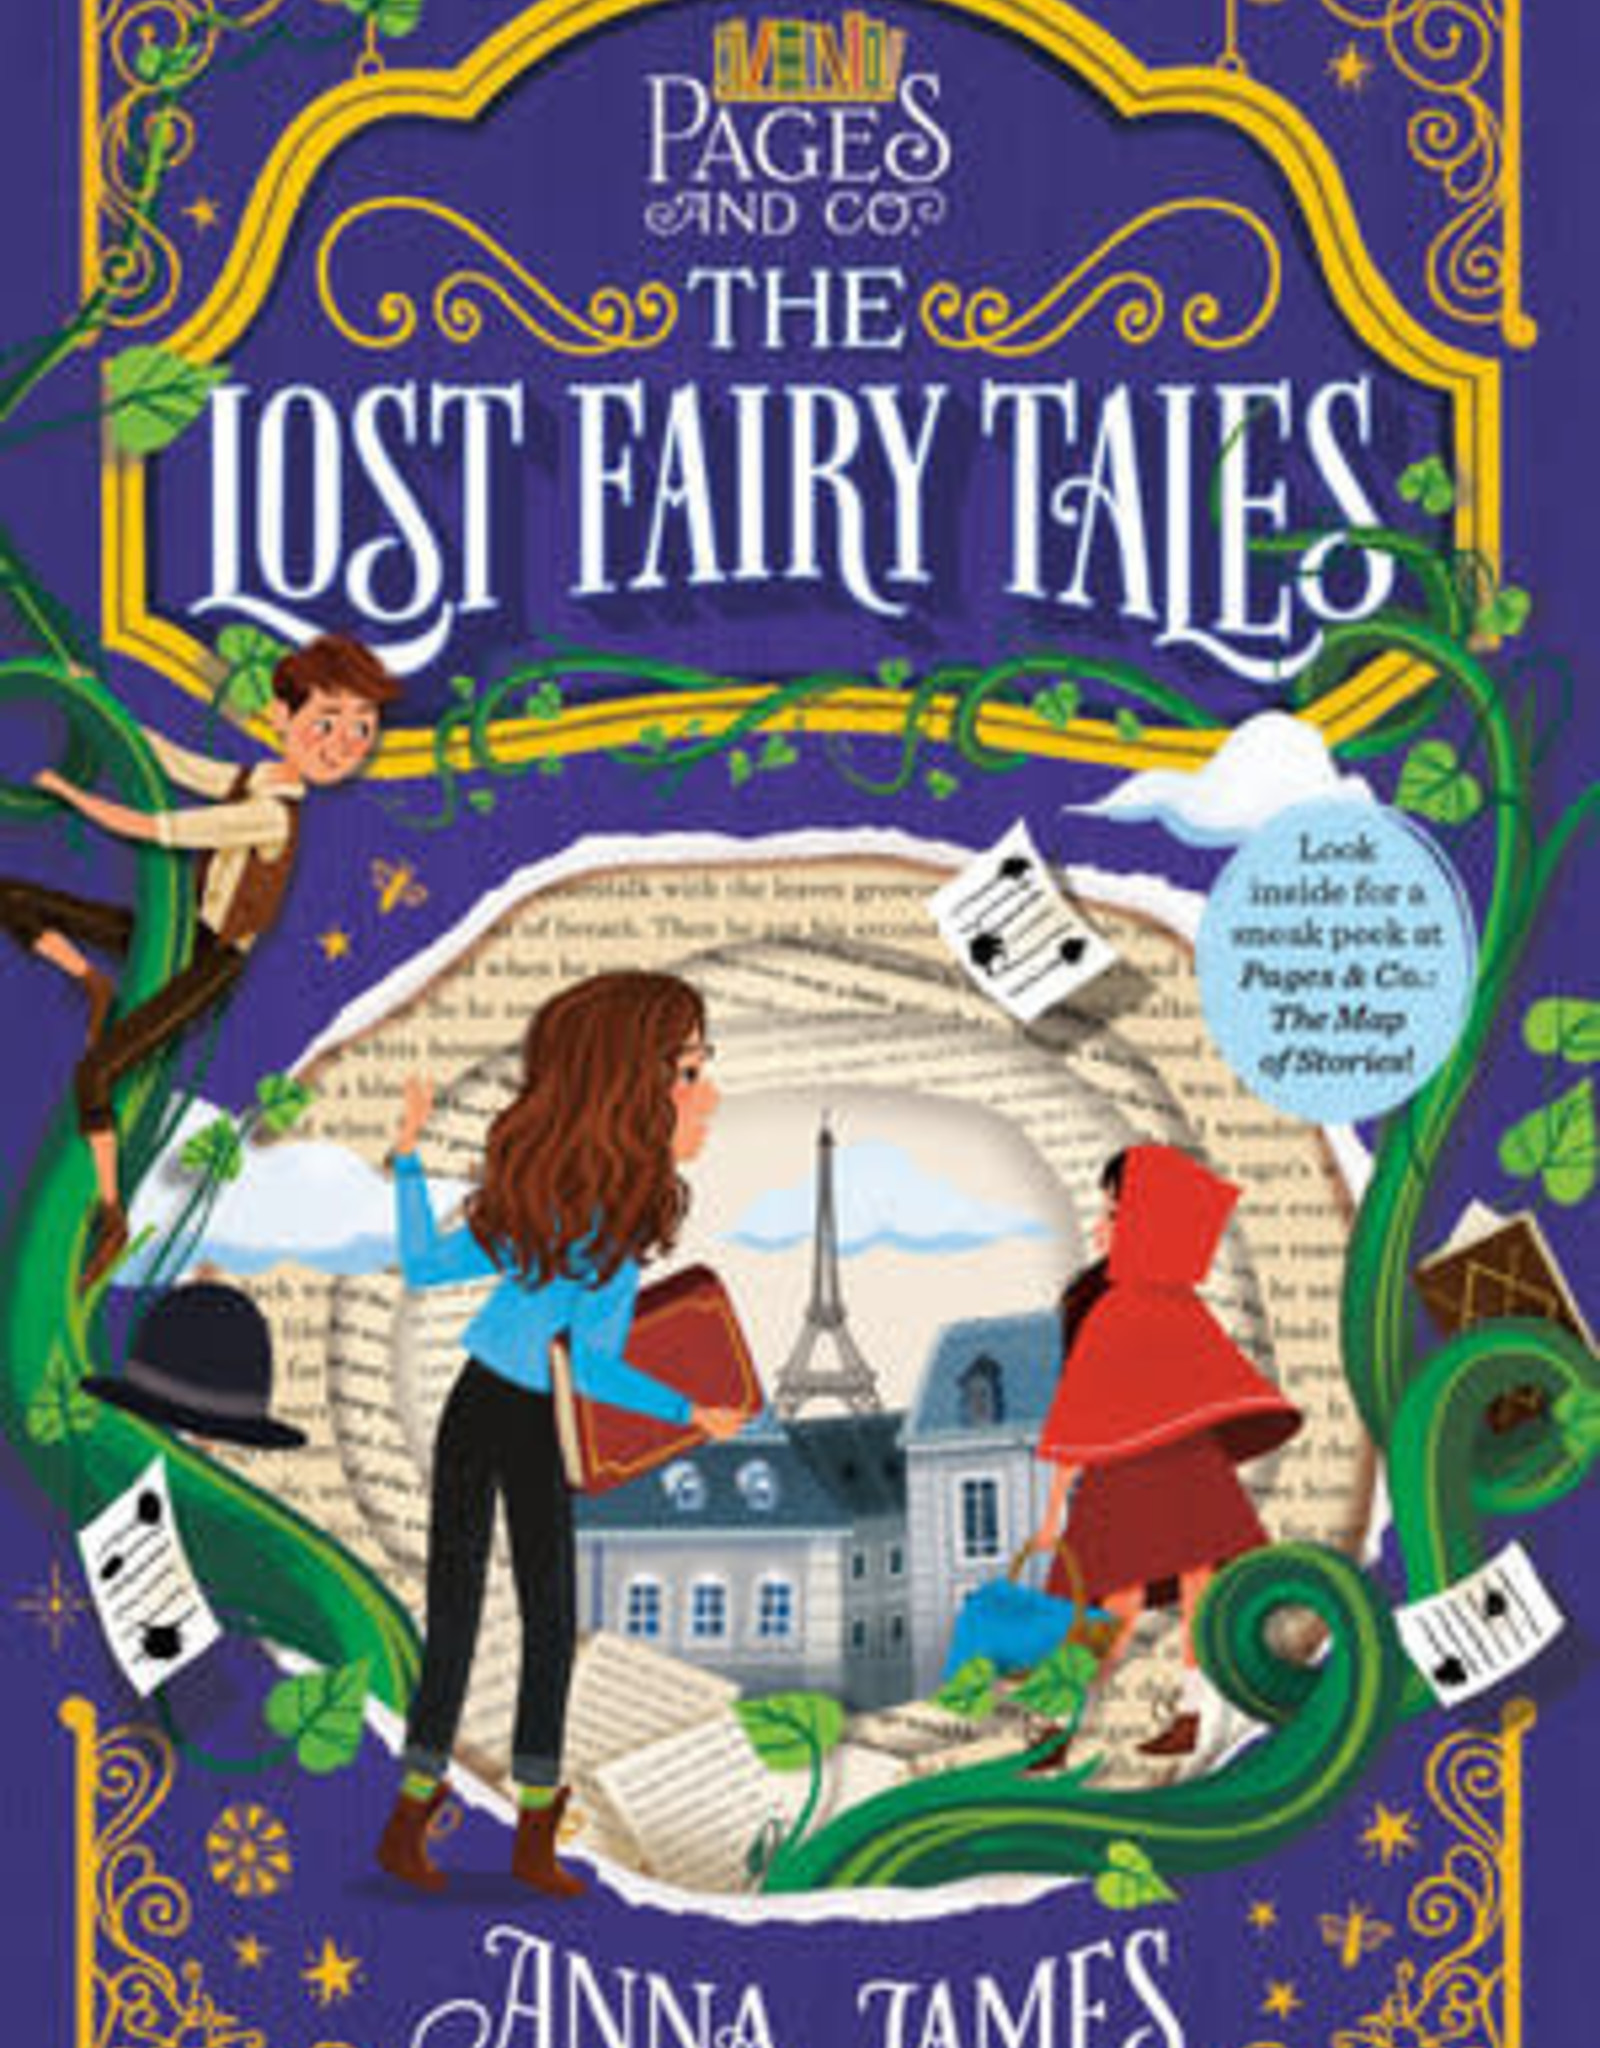 Random House/Penguin Pages & Co.: The Lost Fairy Tales